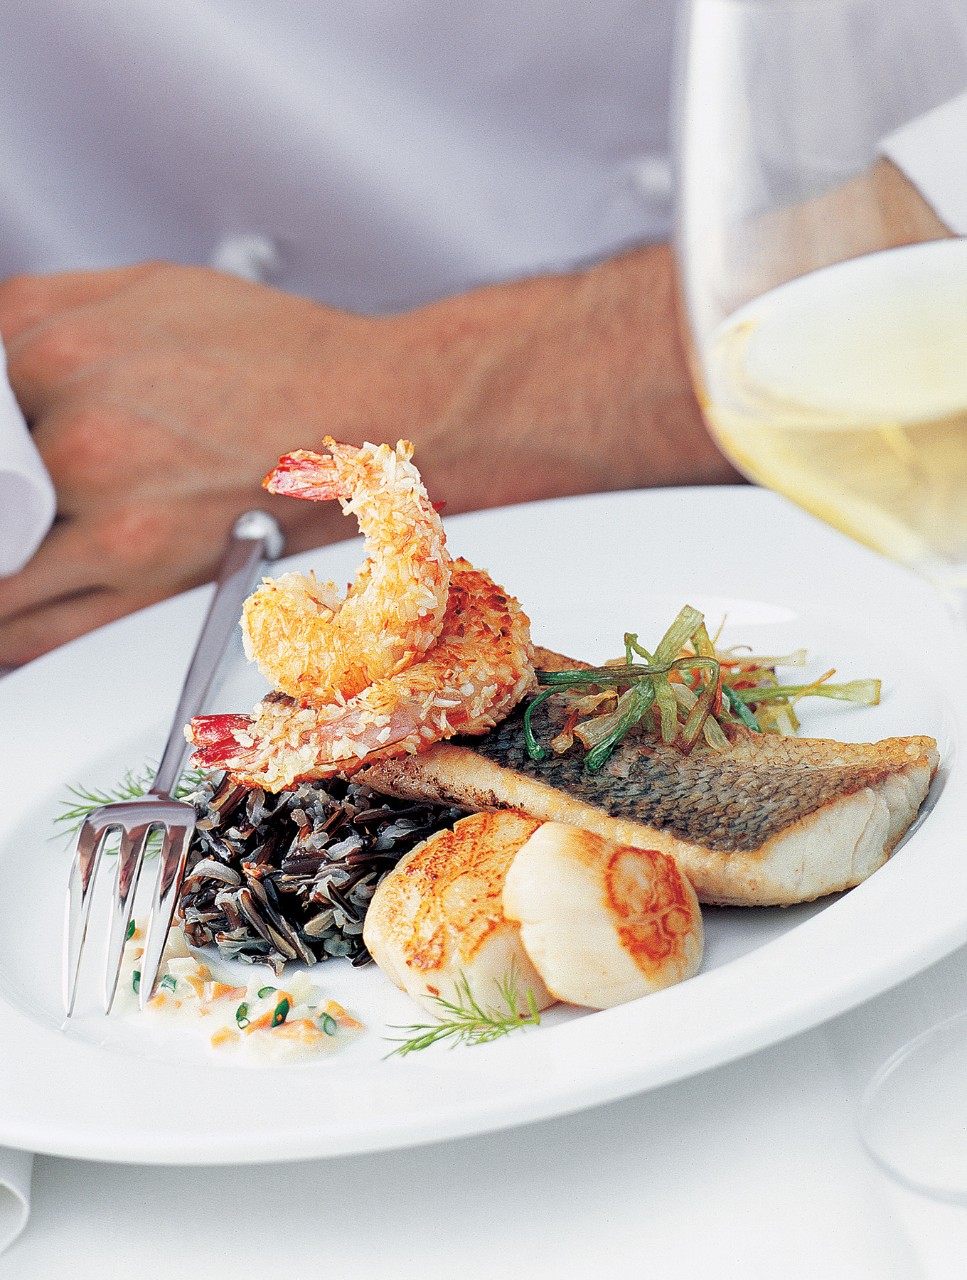 Grosvenor's Panache of Lake Huron Whitefish with Coconut-Fried Shrimp and Scallops